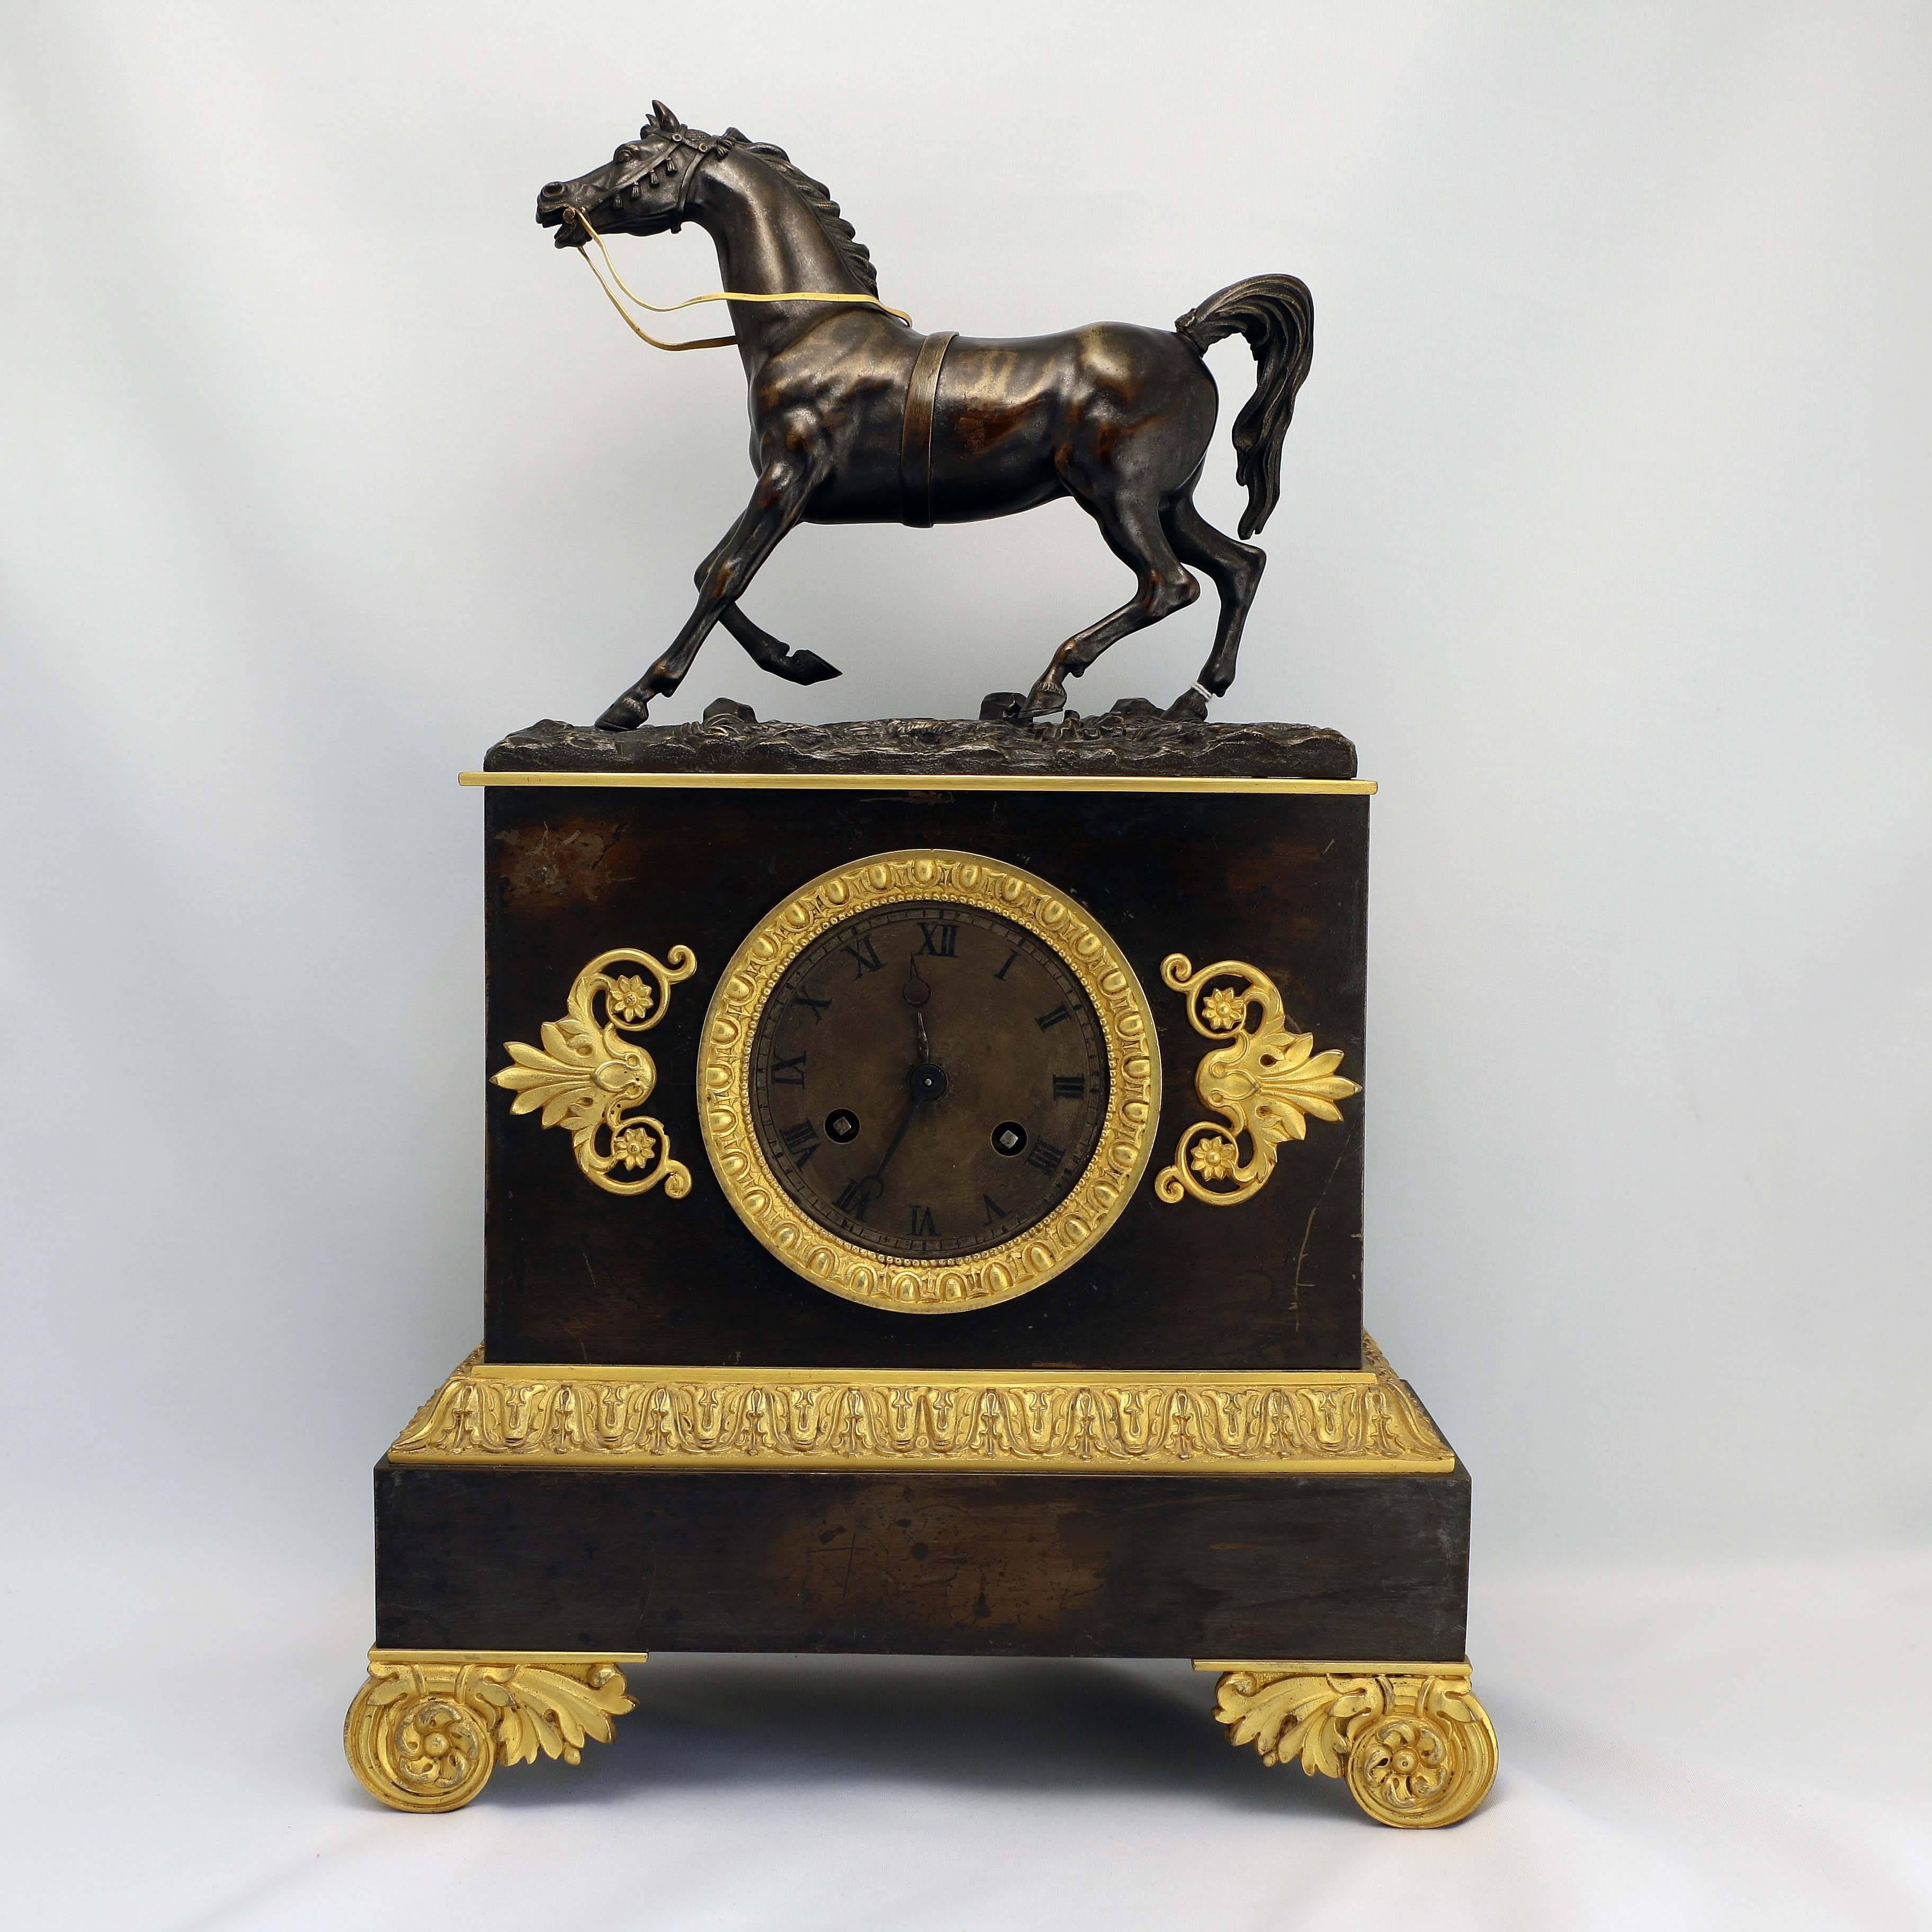 This handsome clock, with bronze case and crisp gilt mounts, adds an elegant accent to any room. Unusually it is surmounted by a bronze model of a thoroughbred. We have left the silvered dial with Roman numerals in original condition. It has an